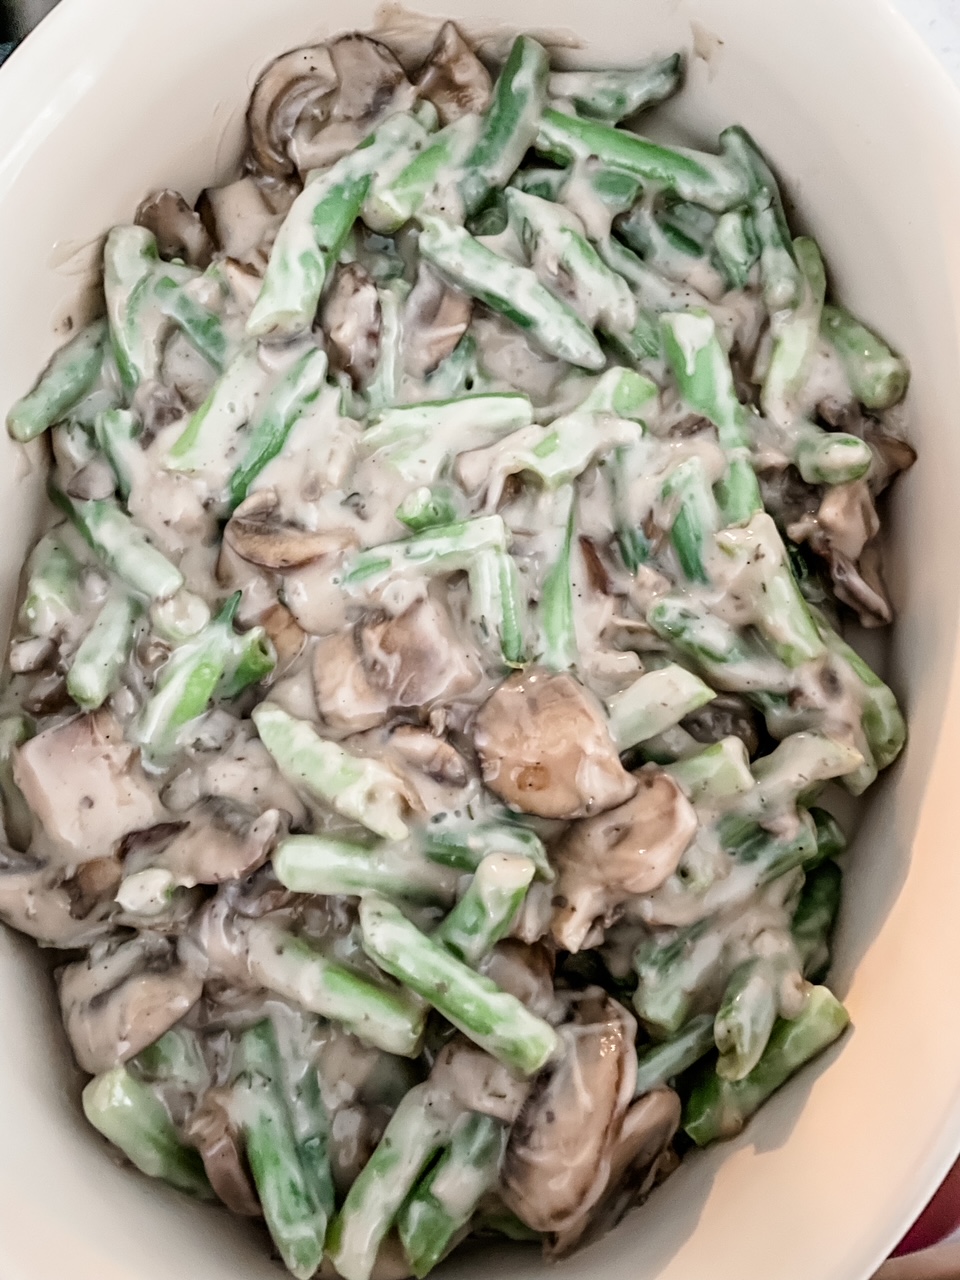 The Easy Healthier Green Bean Casserole without the topping, showing the mixture of soup, green beans, and mushrooms